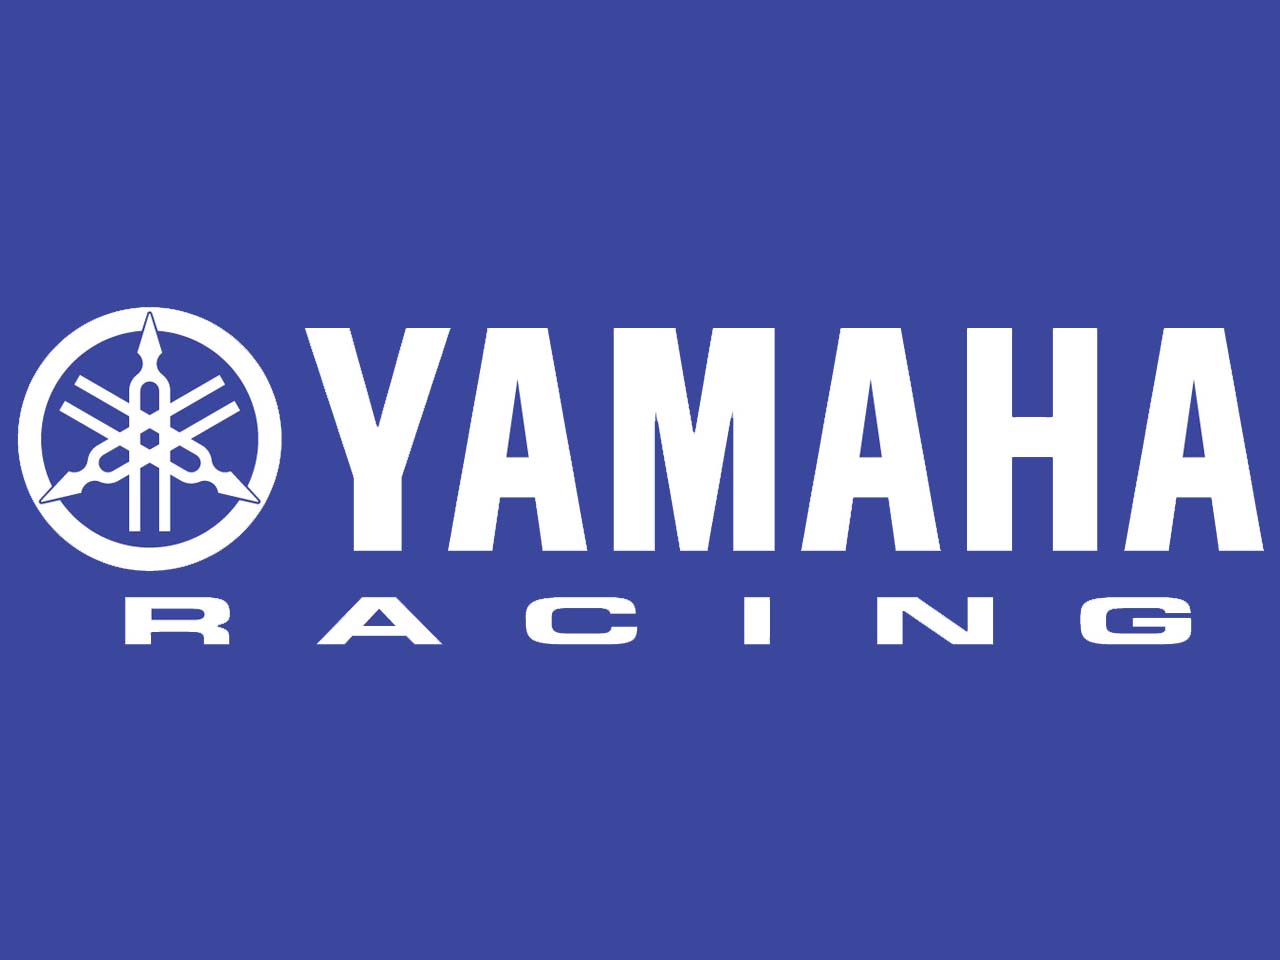 Free download download Yamaha Logo 7163 Hd Wallpapers in Logos Imagescicom [1280x960] for your 